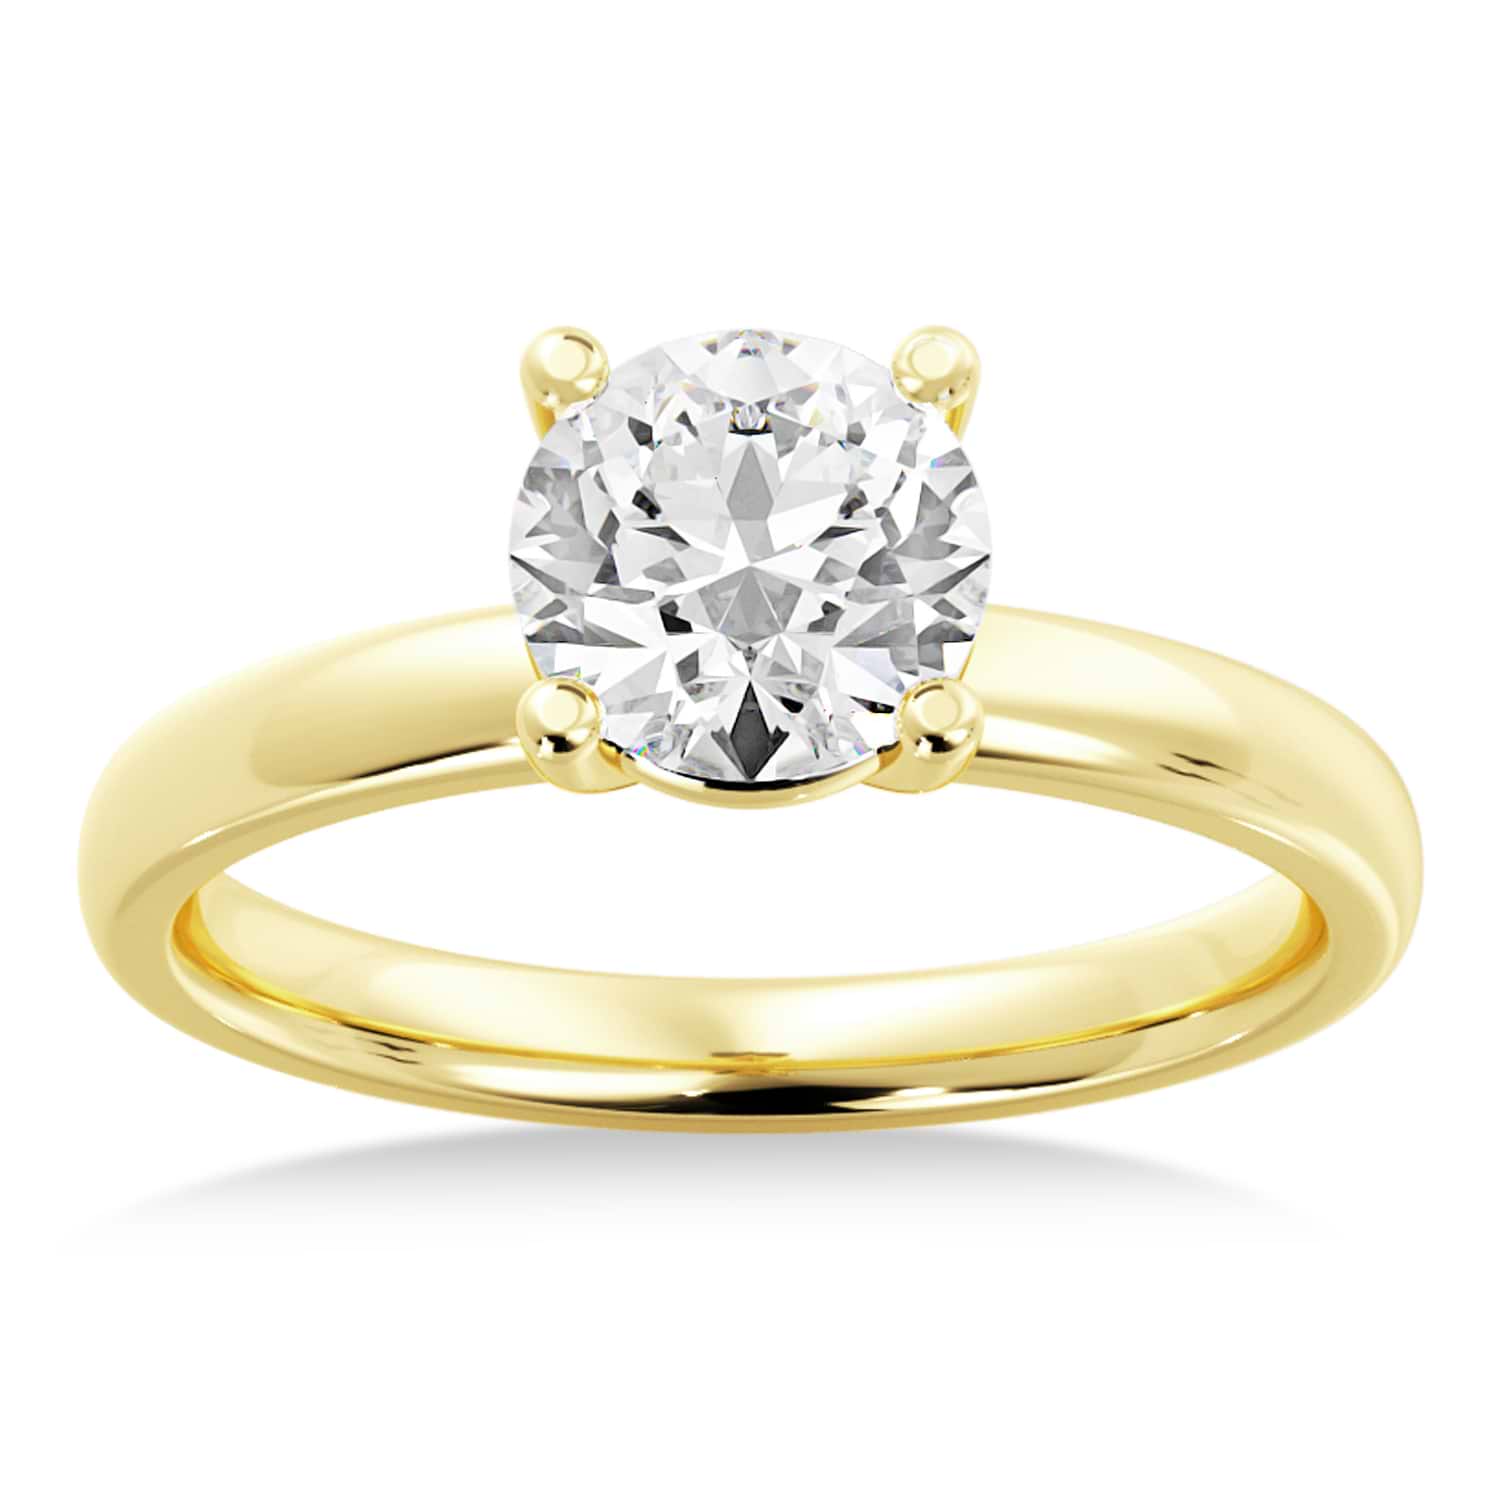 Basket Solitaire Engagement Ring 14k Yellow Gold